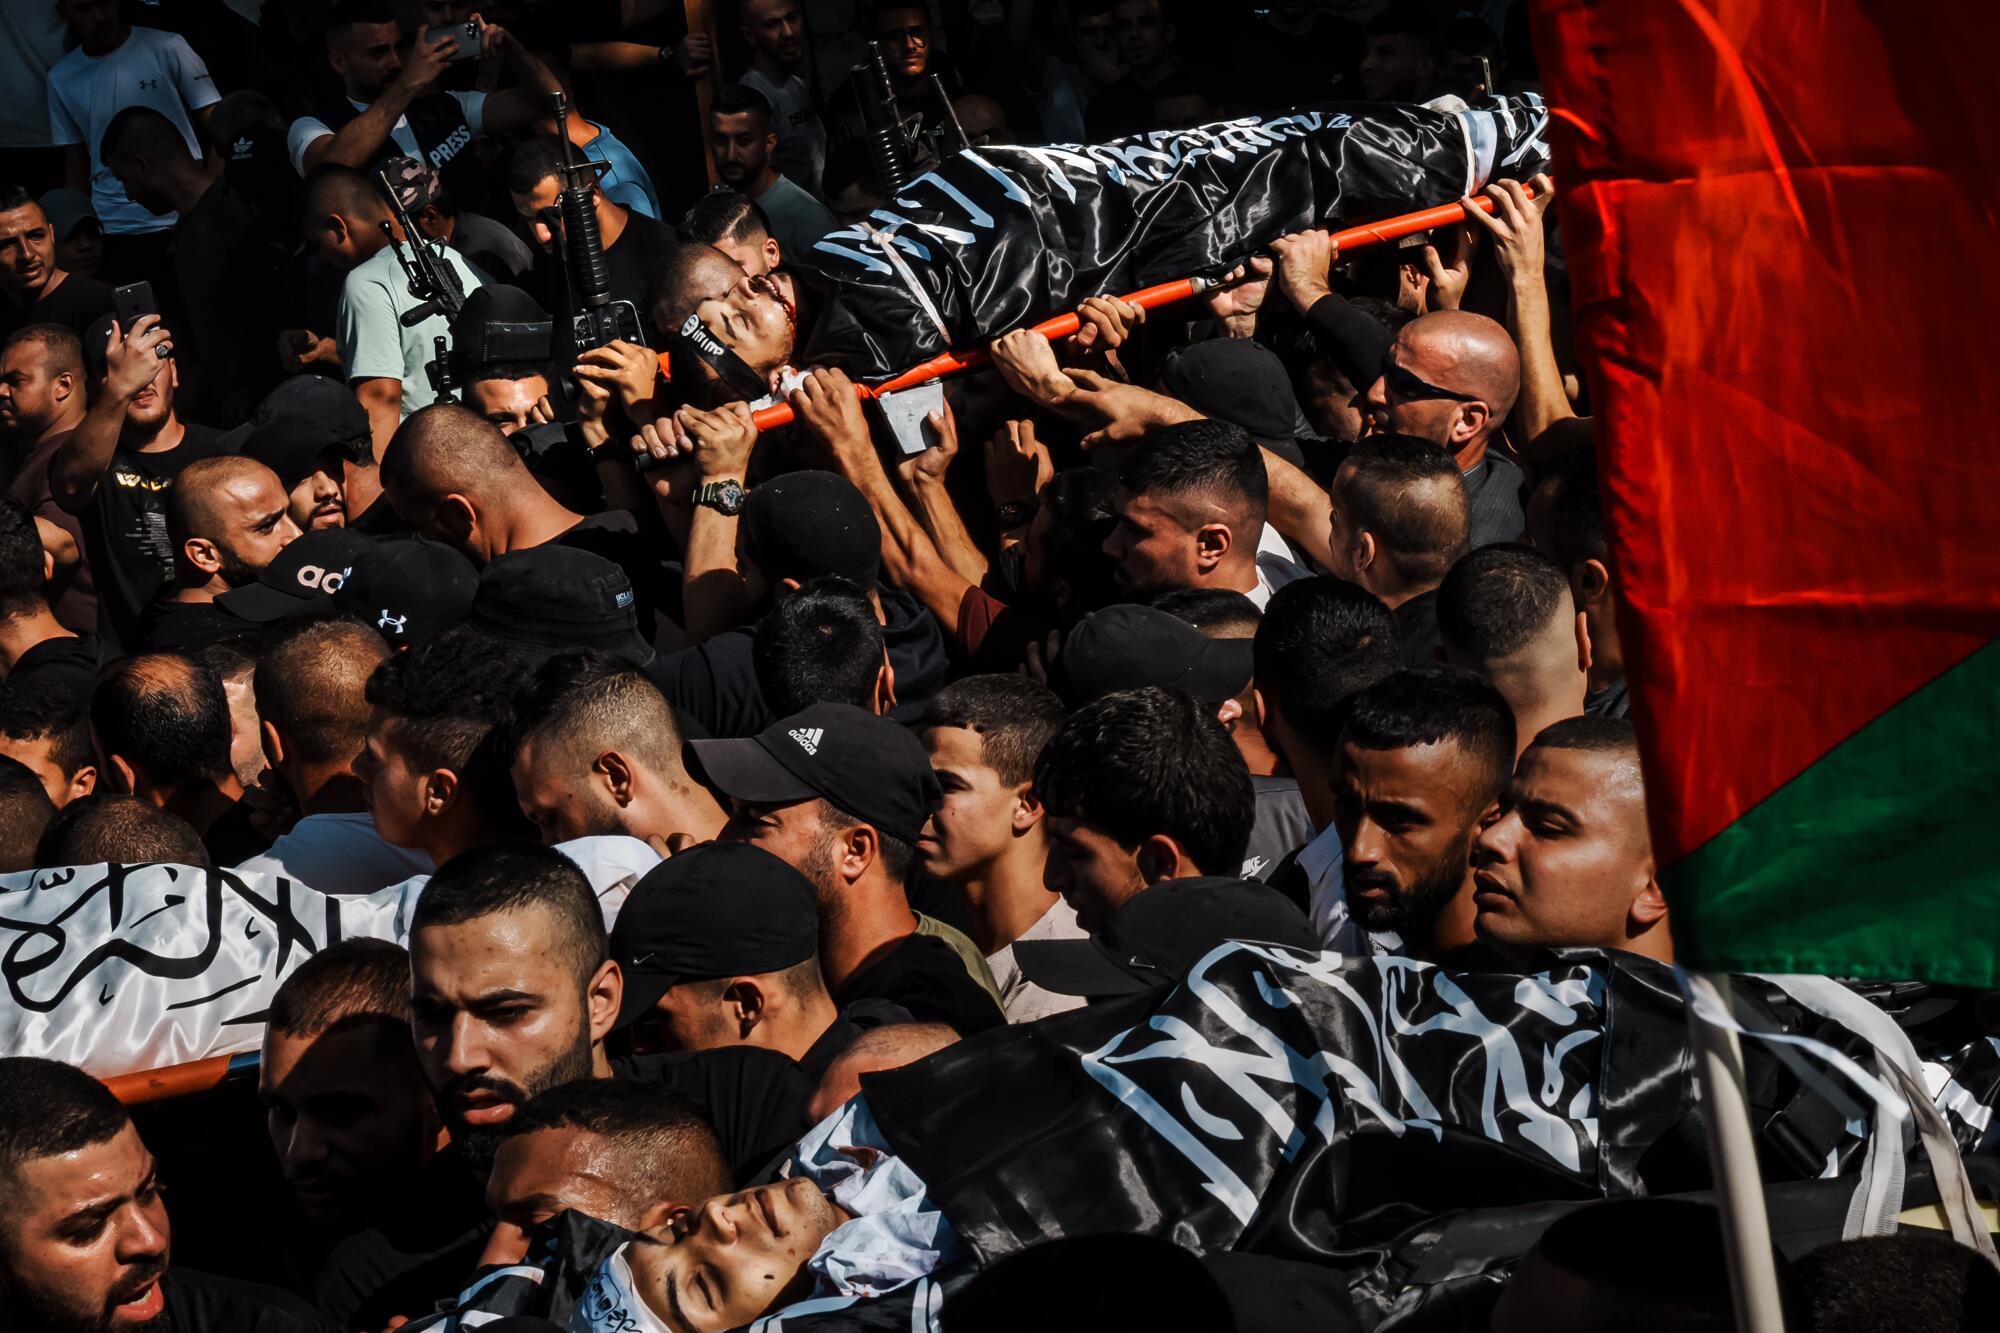 People in a crowd hold up a black-covered body on a stretcher near red-and-green flag 